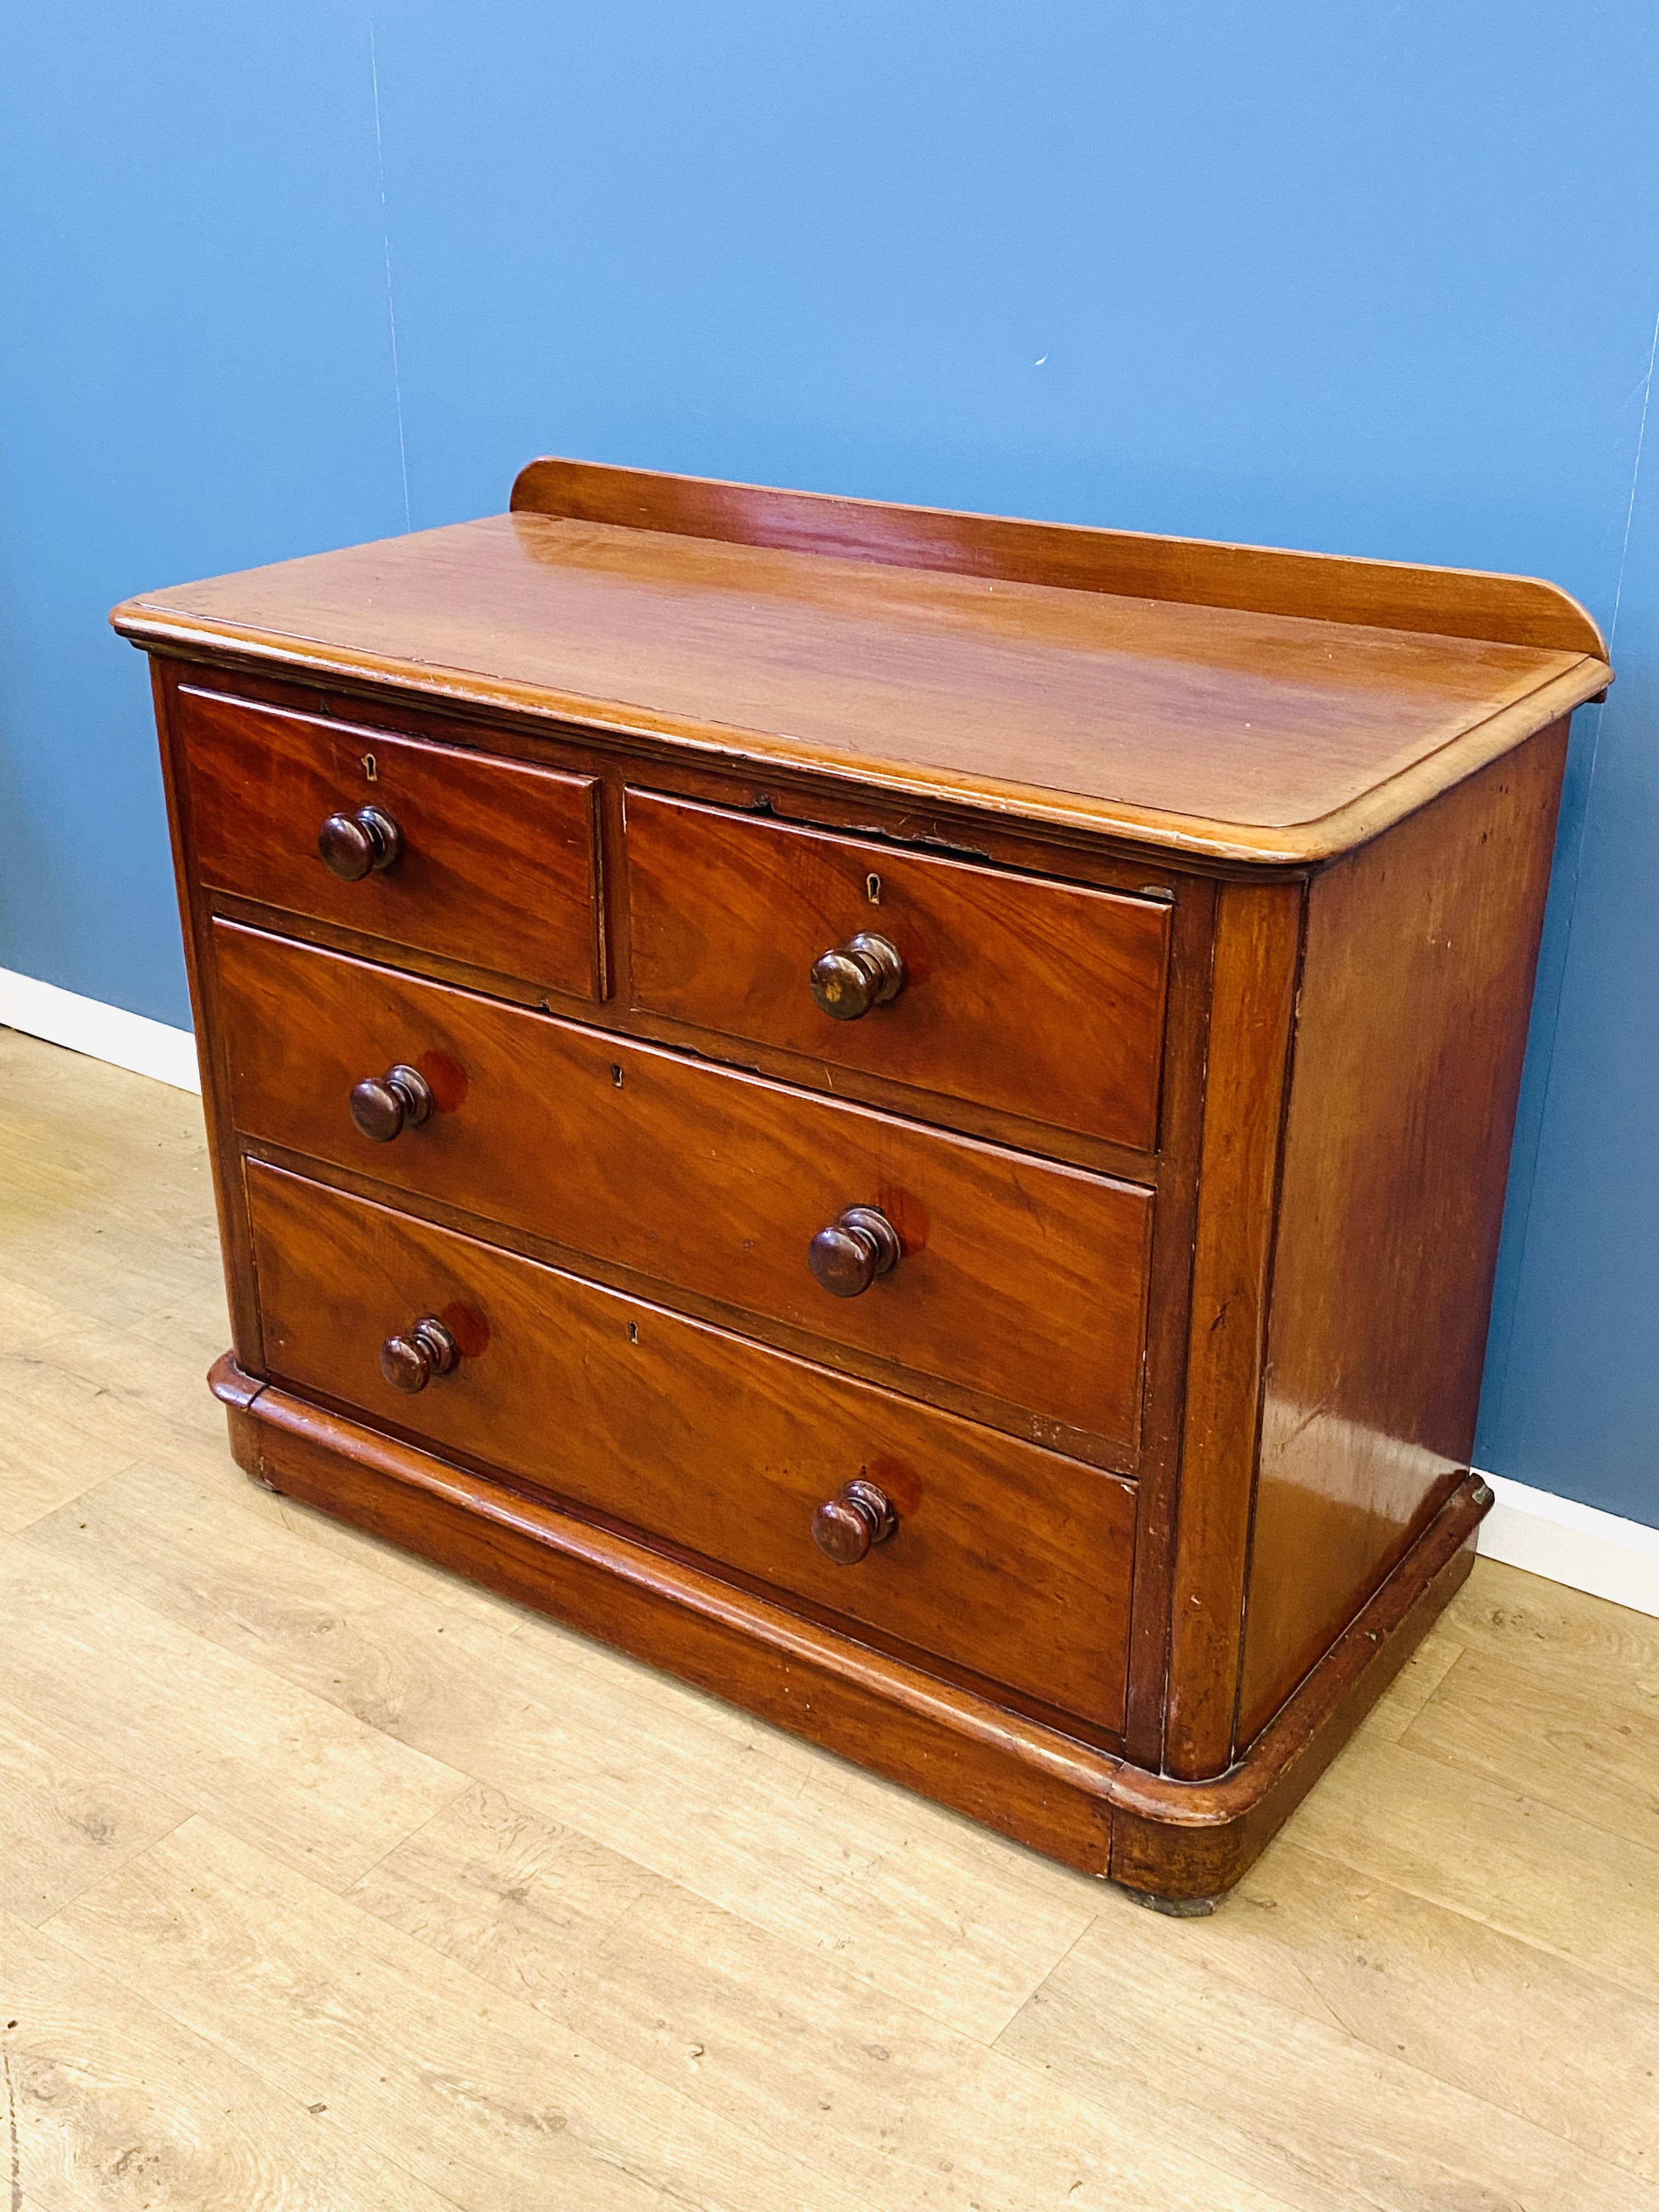 Mahogany Victorian chest of drawers - Image 2 of 5